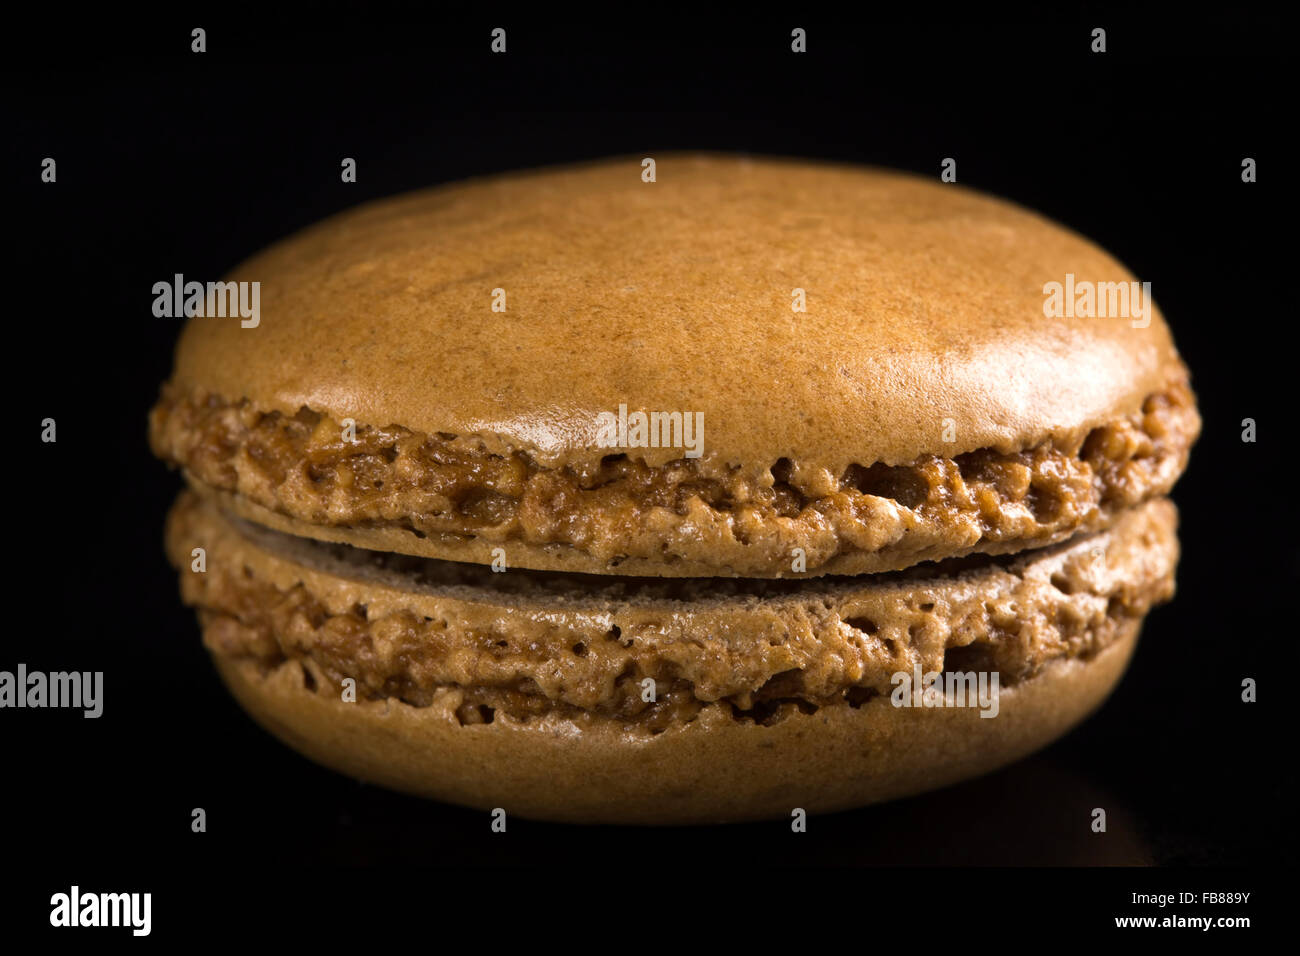 One chocolate macaroon on a black background Stock Photo